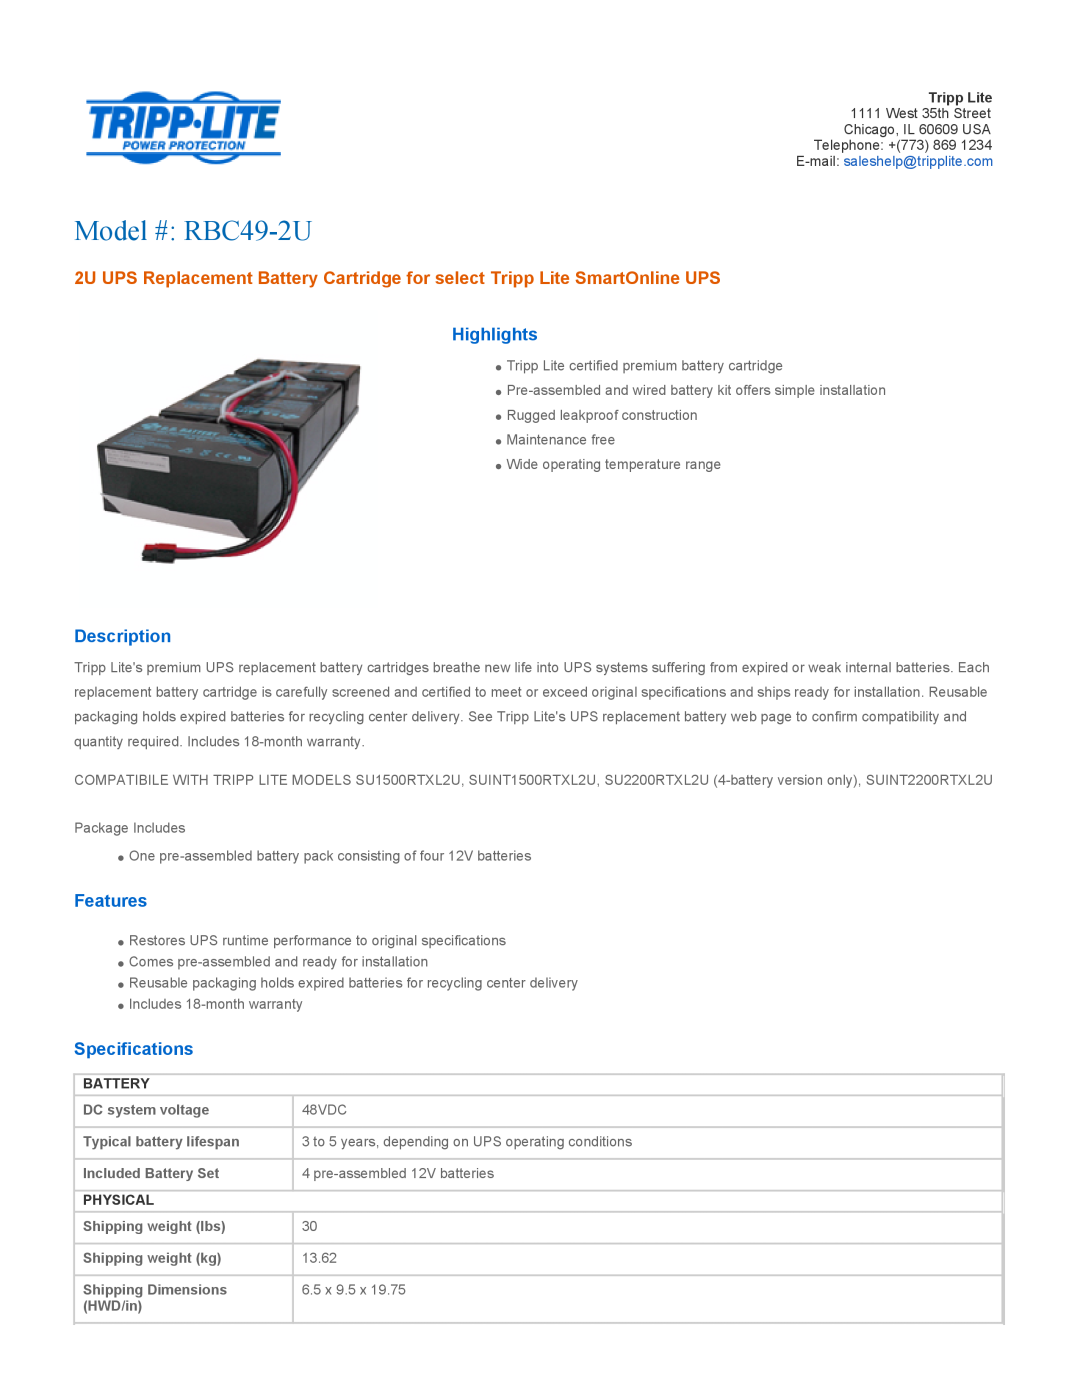 Tripp Lite RBC49-2U specifications DC system voltage, Typical battery lifespan, Included Battery Set, Physical, HWD/in 